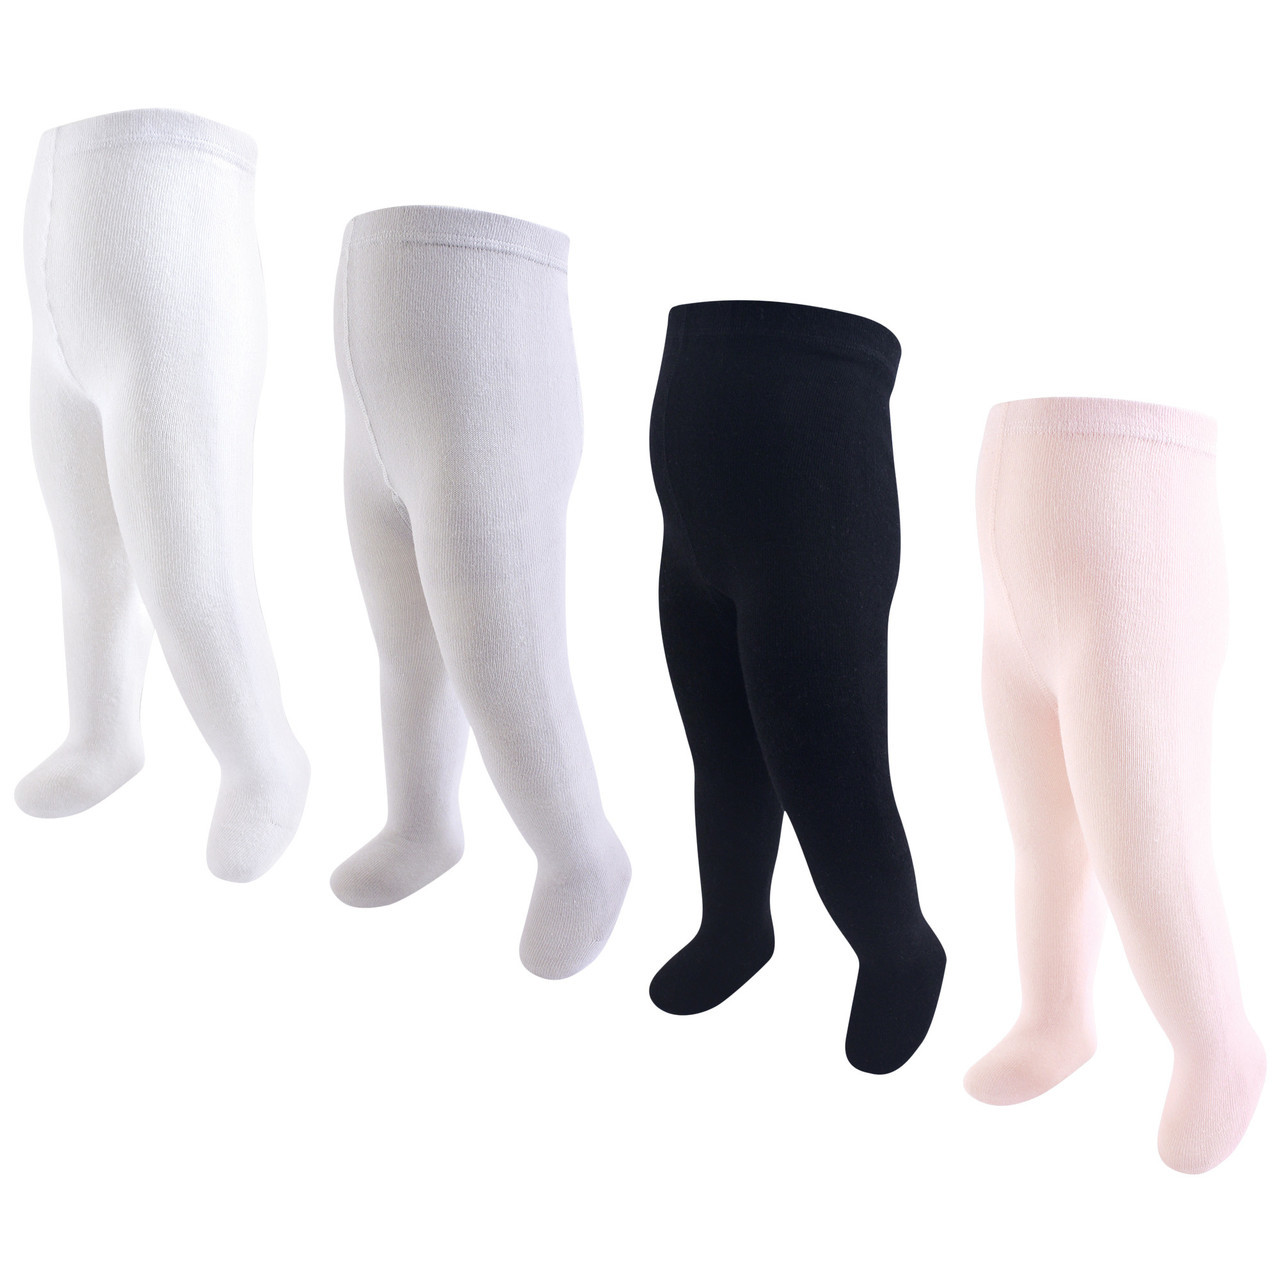 Hudson Baby Cotton Tights, 4-Pack, Light Pink and Black